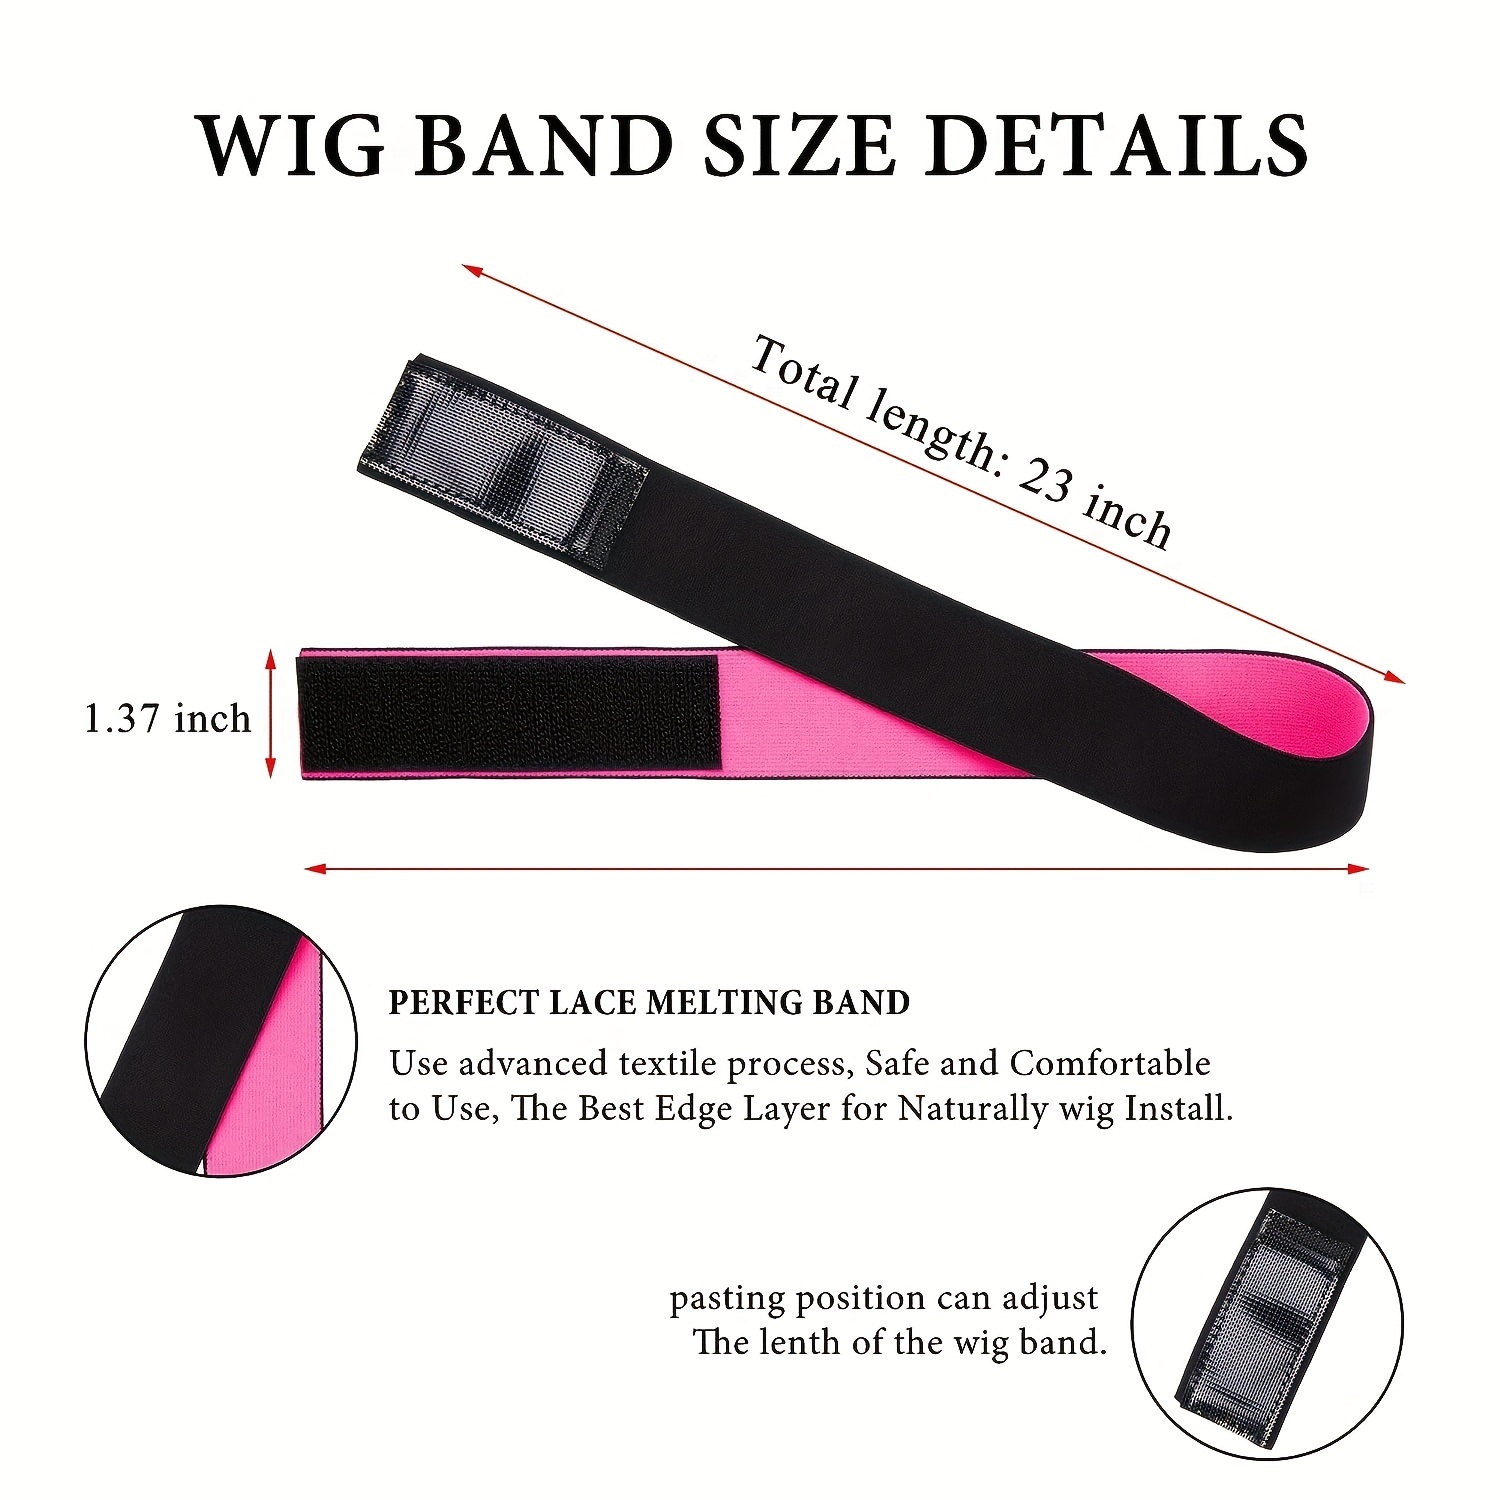  Wig Kit for Lace Front Wigs for Beginners 7Pcs, Lace Melting  Elastic Band for Wigs, Edge Laying Scarf with Wig Caps, Eyebrow Razors,  Tweezers, Edge Brush, Wig Grip Headband, Mini